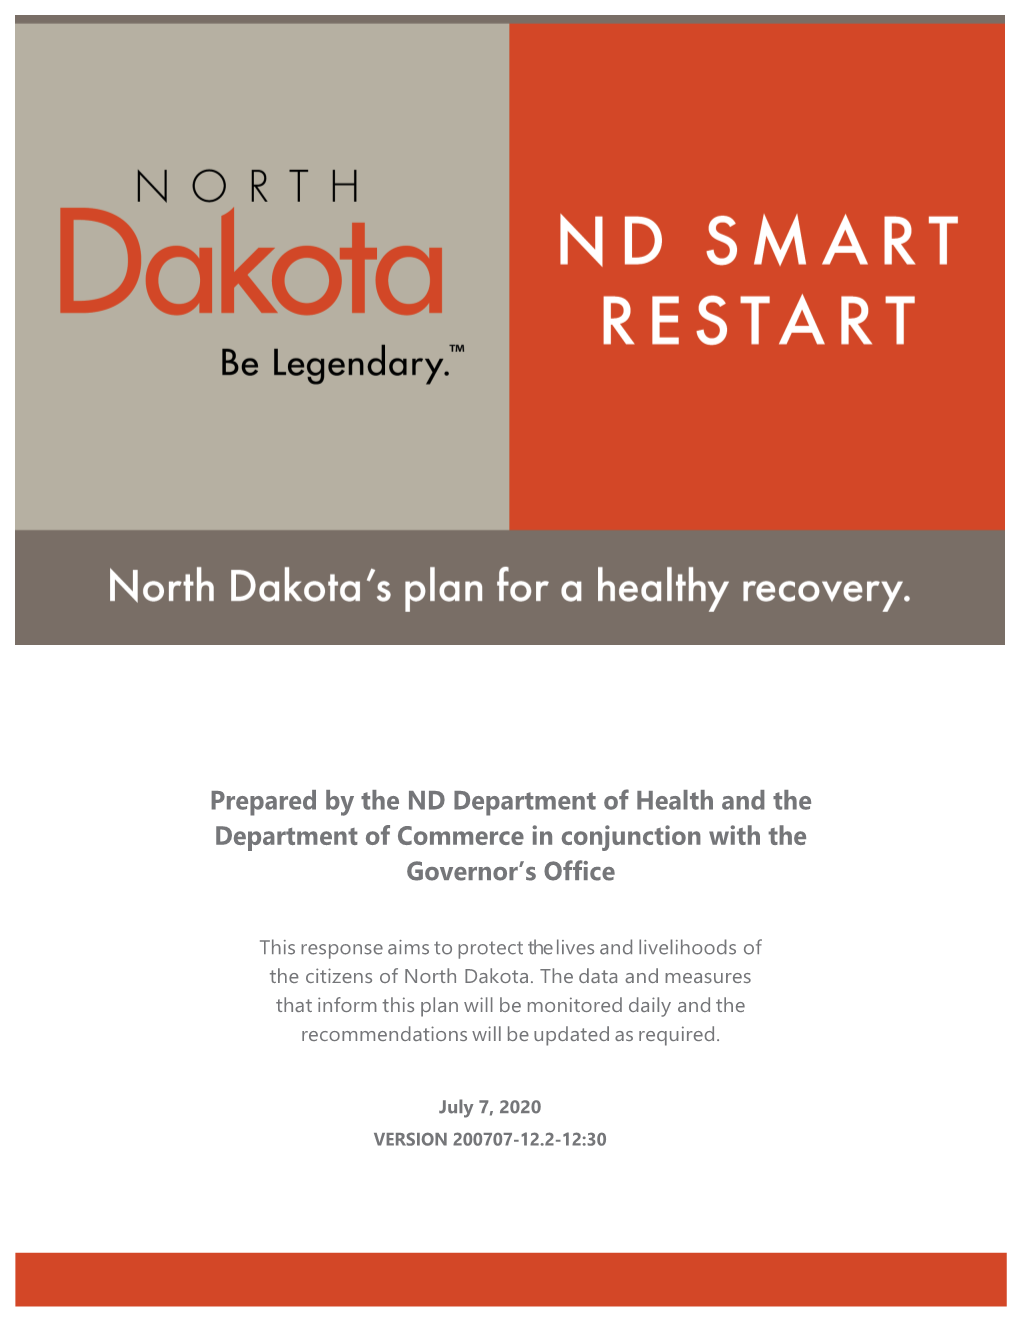 North Dakota Smart Restart Plan As a Roadmap to a Better, Safer and Healthier Tomorrow for Employers, Employees and Customers Alike